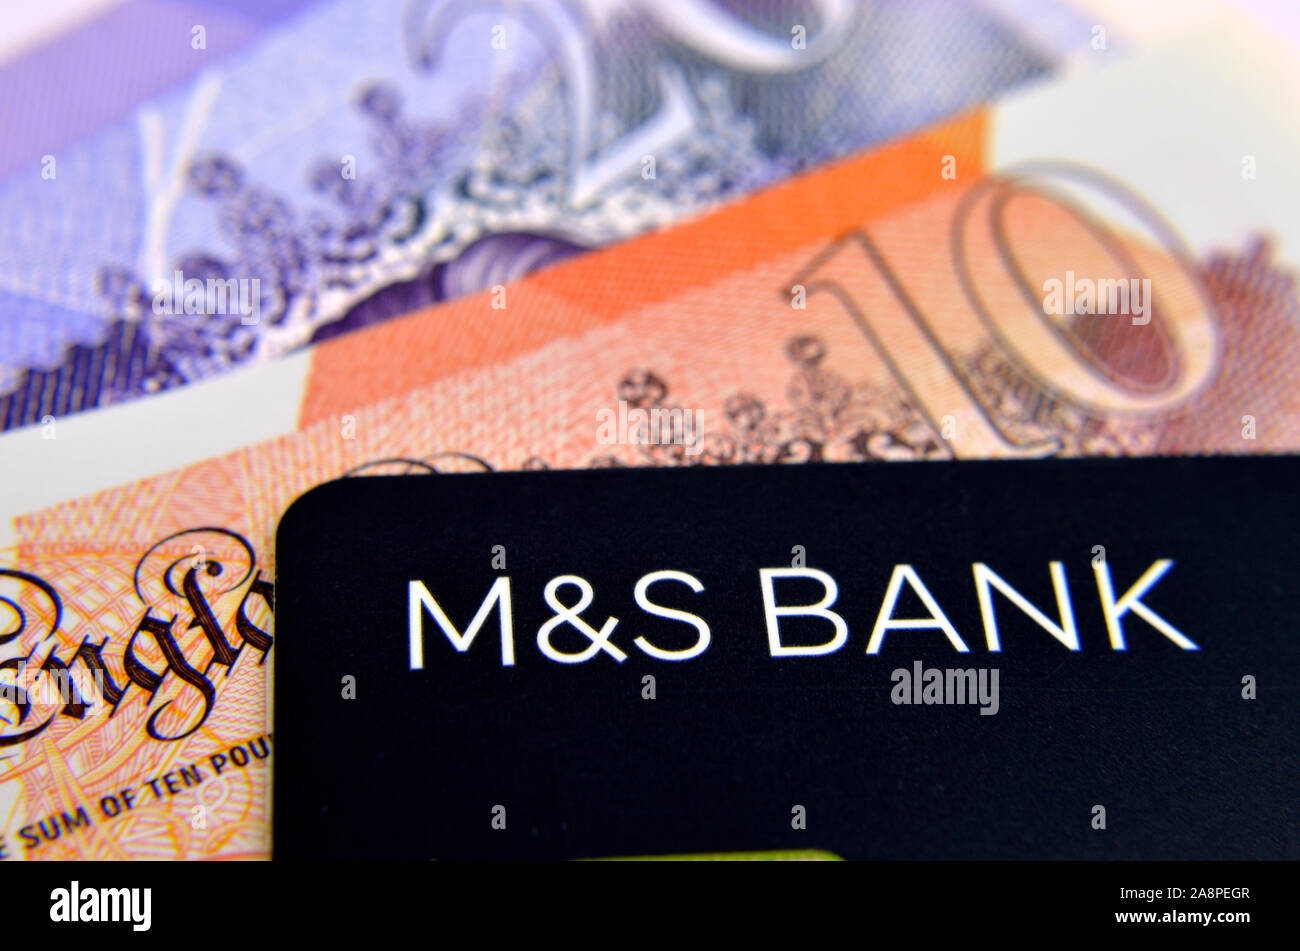 M&S bank credit card and blurred cash at the background. Photo with selective focus. Stock Photo